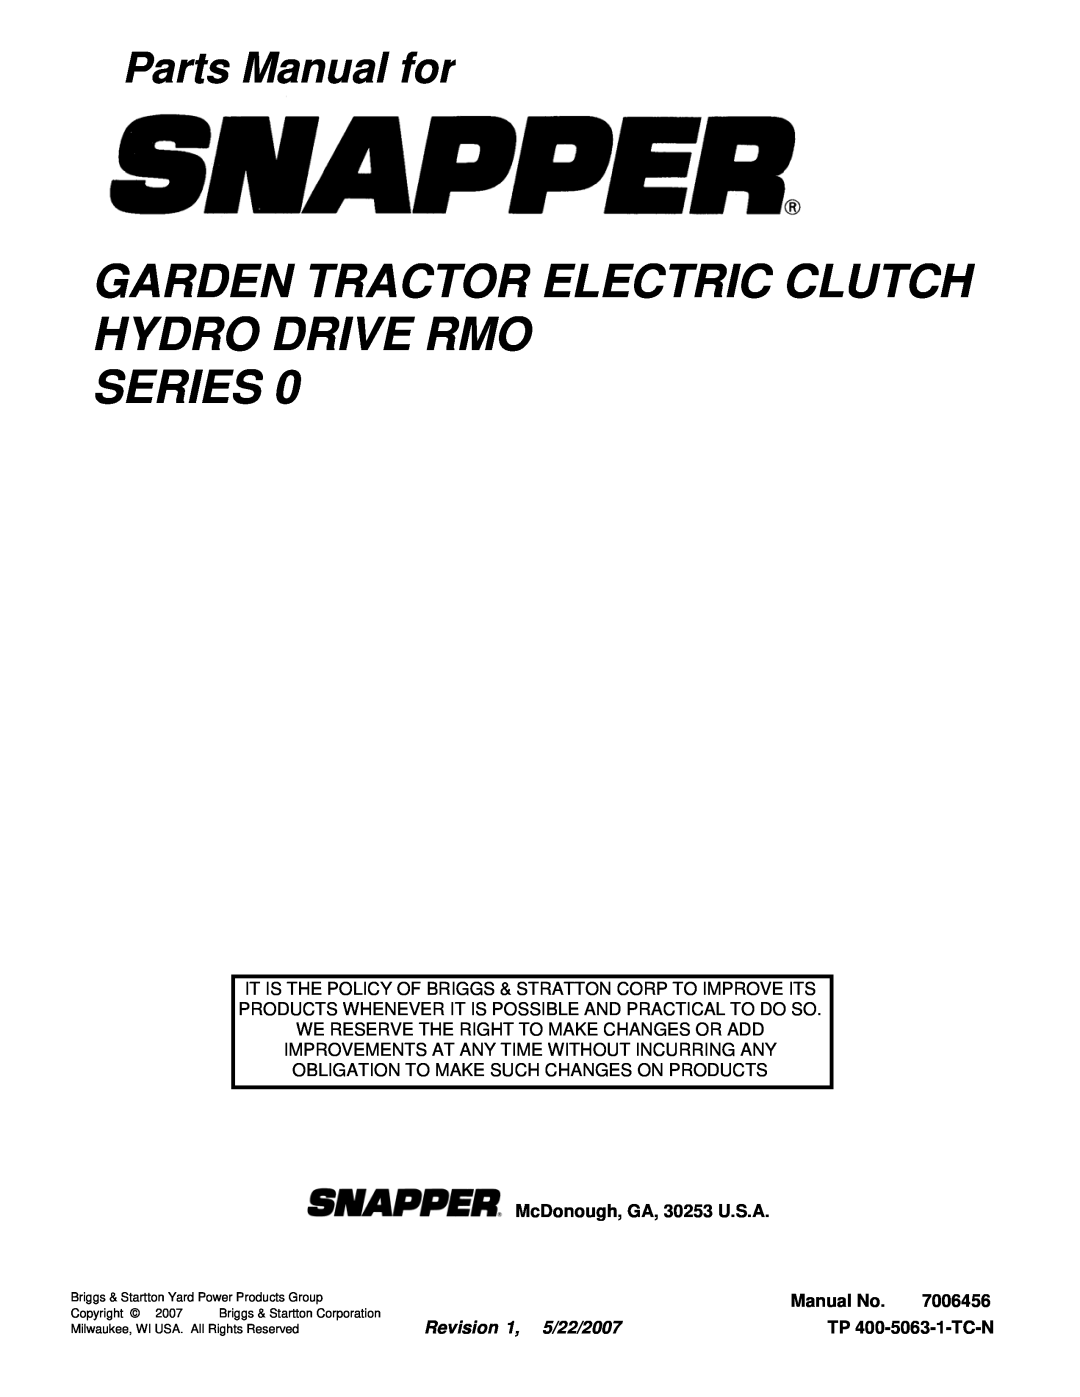 Briggs & Stratton GT23540 (2690258) Garden Tractor Electric Clutch Hydro Drive Rmo, Series, Parts Manual for, Manual No 